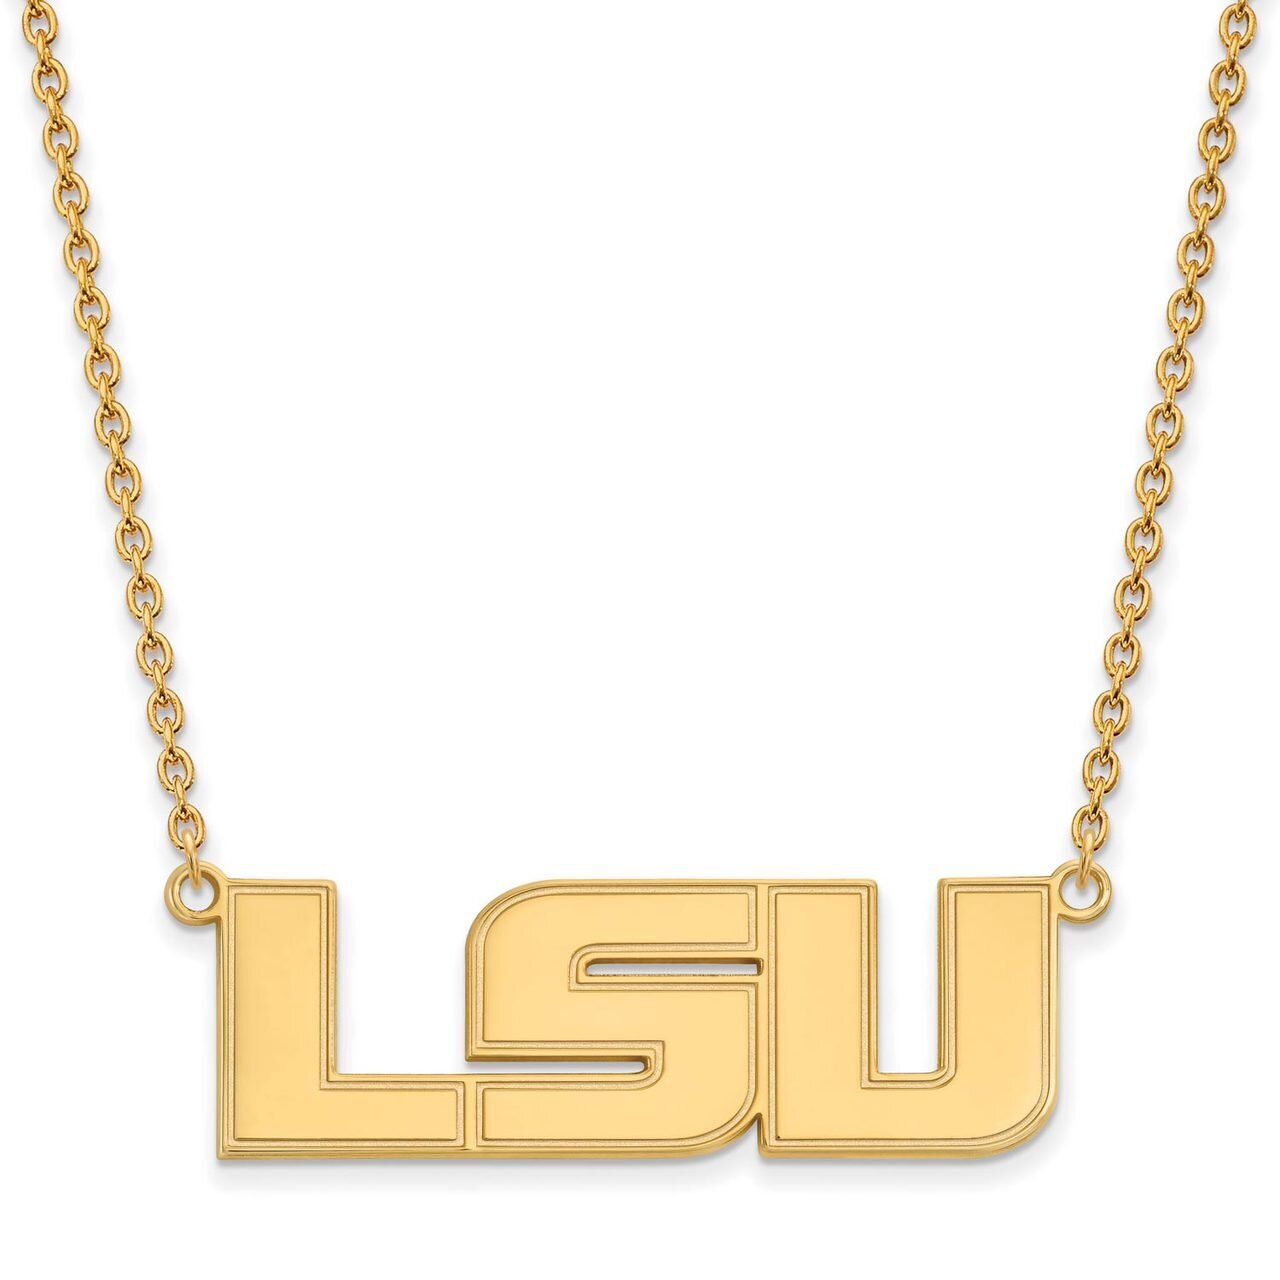 Louisiana State University Large Pendant with Chain Necklace 10k Yellow Gold 1Y010LSU-18